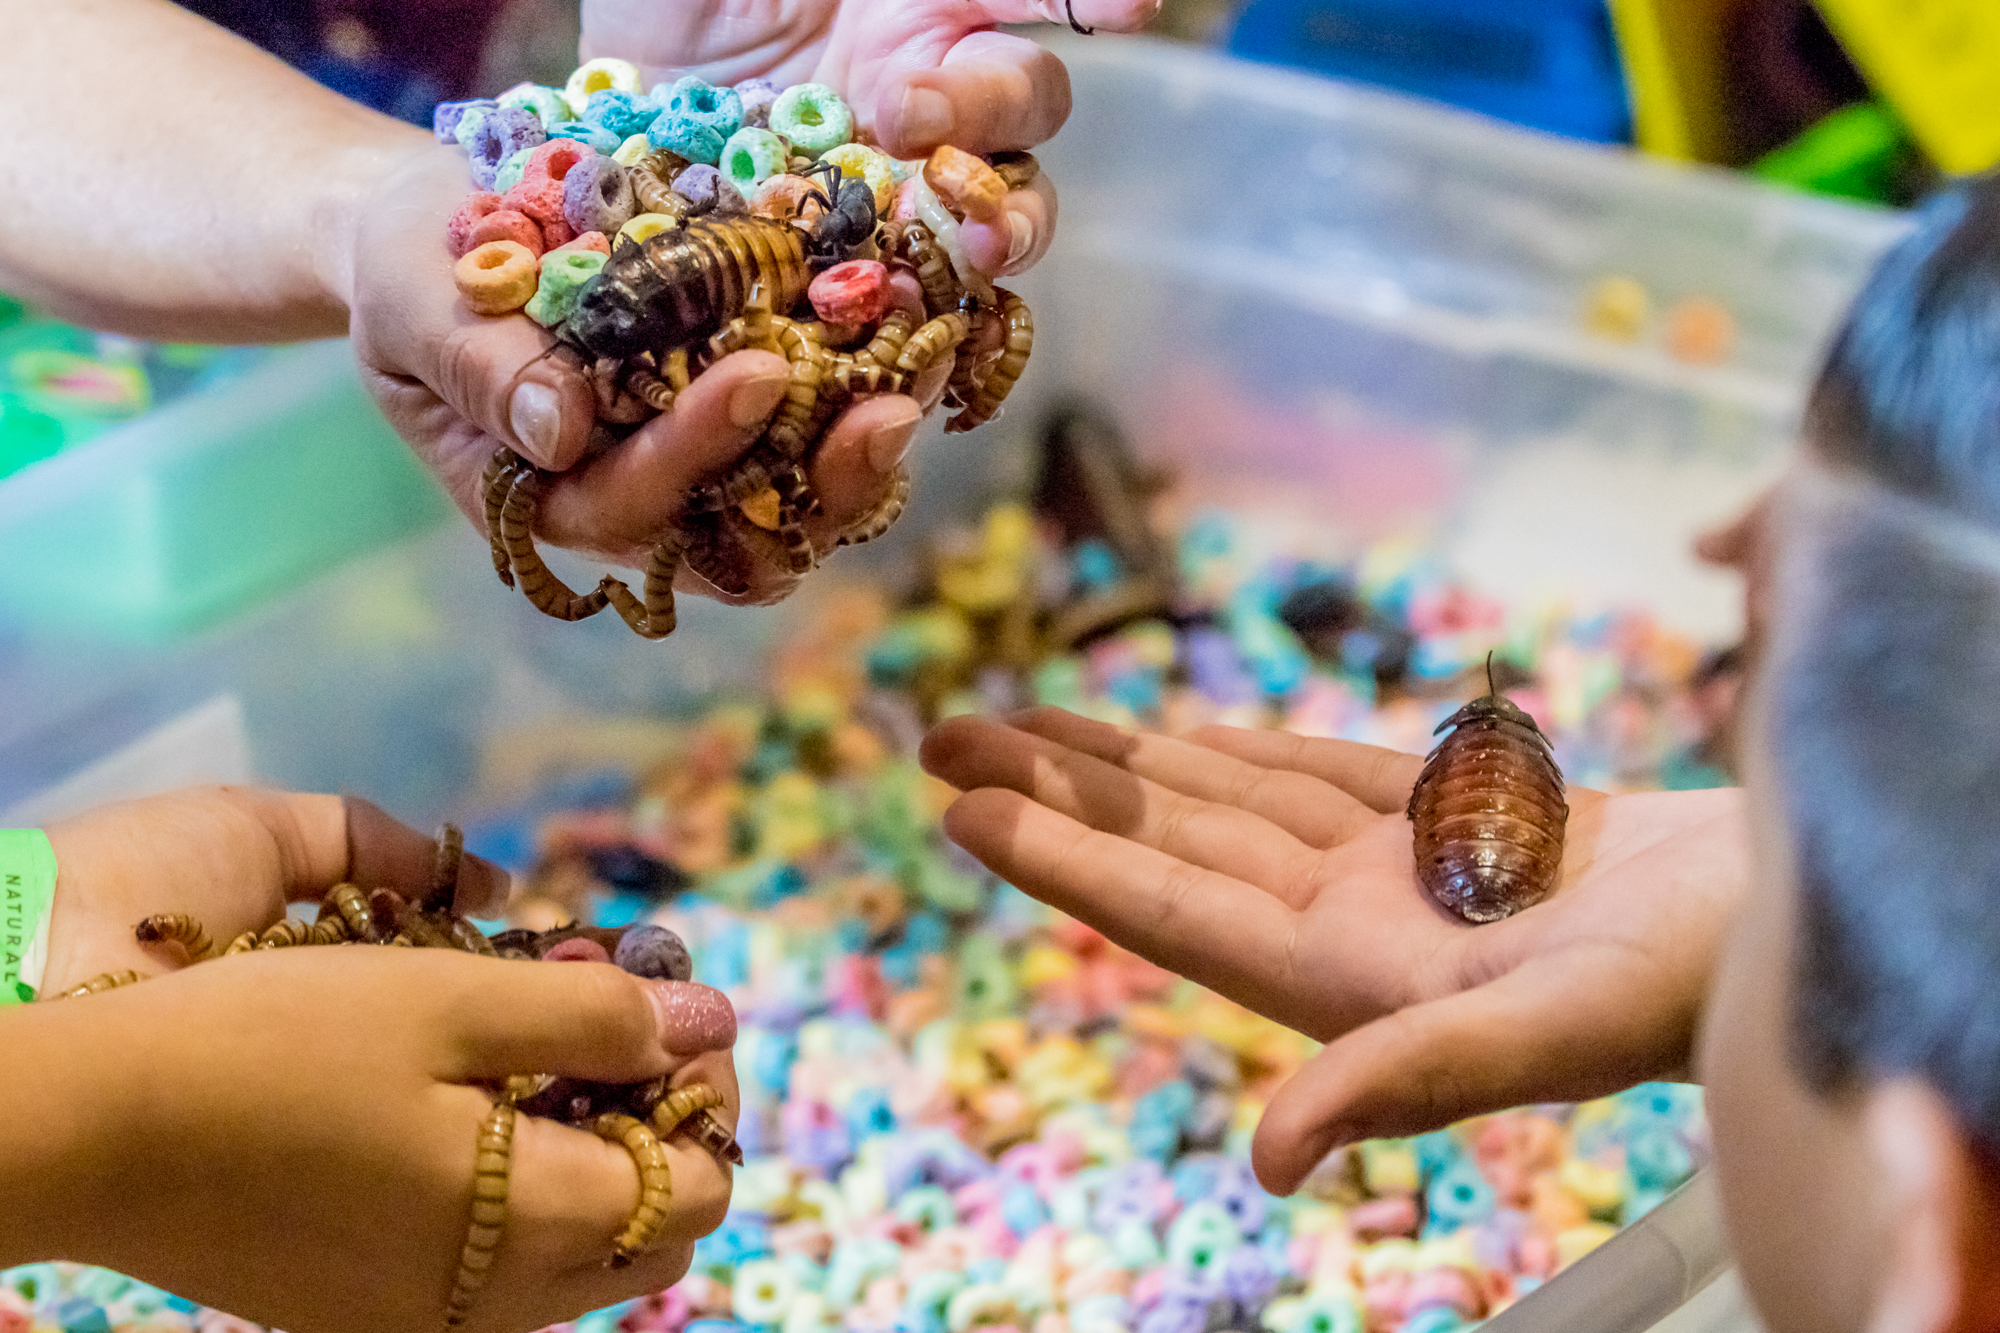  People hold an asosrtment of meal worms, cockroaches, and froot loops at the Los Angeles National History Museums 32nd Annual Bug Fair. This strange combination showed to be problematic when a child started to eat the froot loops. The Bug Fair took 